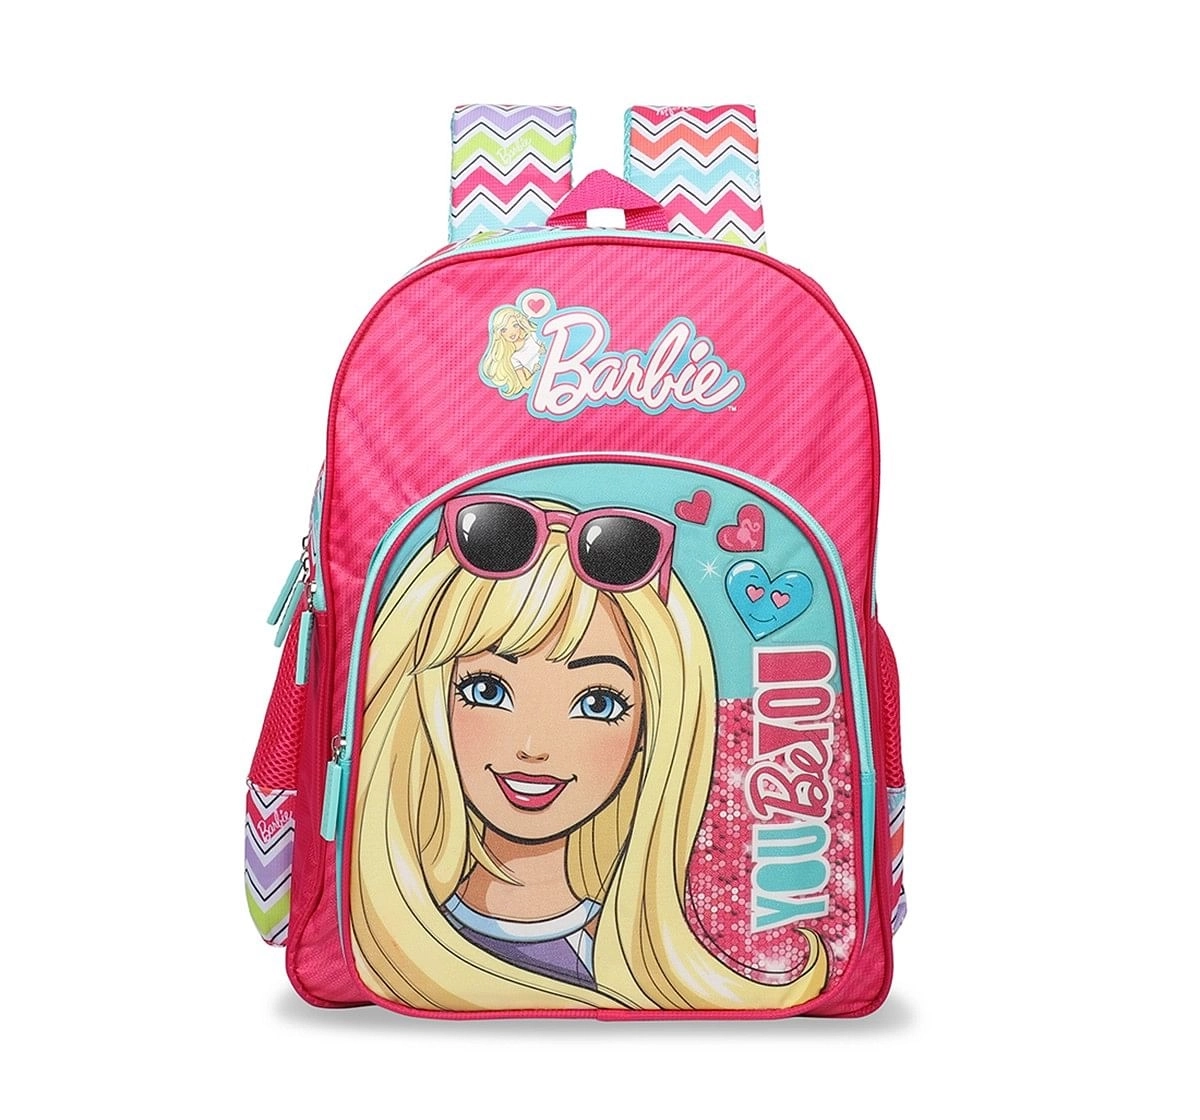 Barbie Barbie You Be You School Bag 30 Cm Bags for age 3Y+ (Pink)